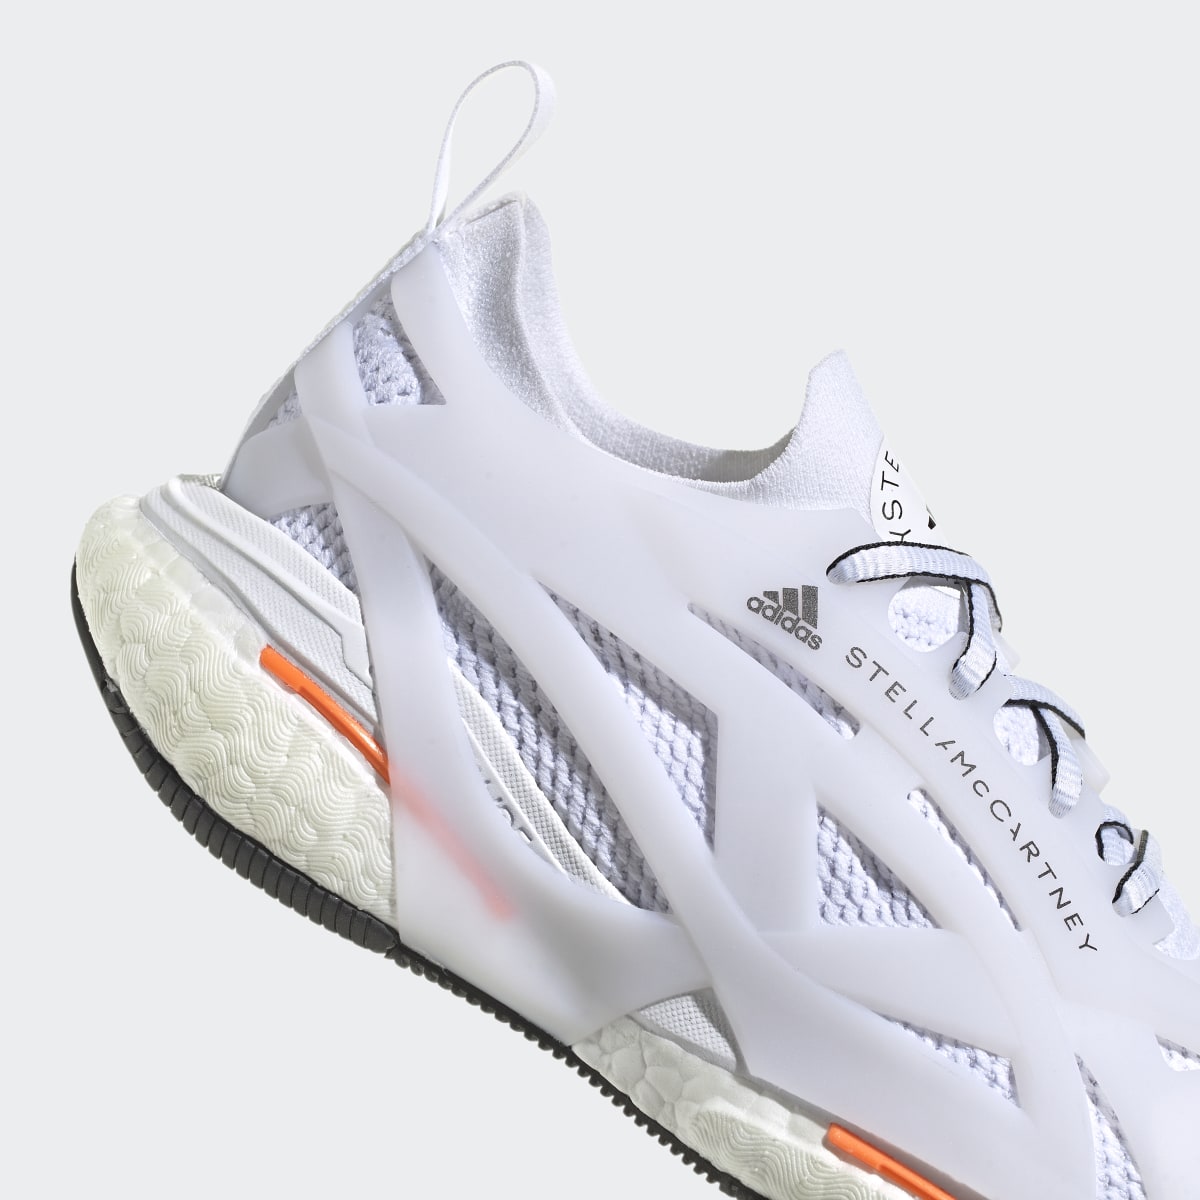 Adidas by Stella McCartney Solarglide Running Shoes. 9